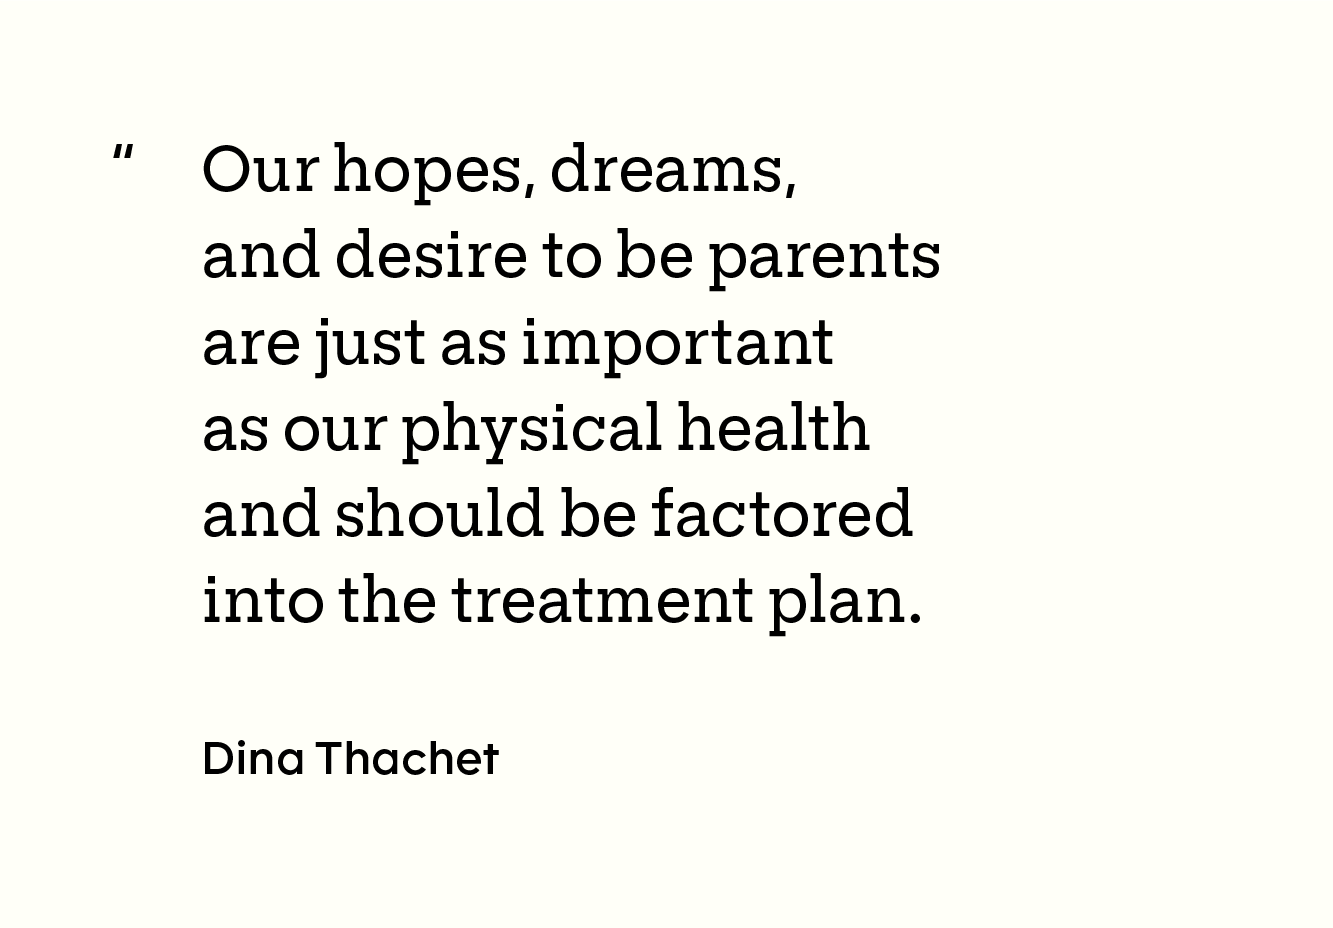 Box with the quote “Our hopes, dreams, and desire to be parents are just as important as our physical health and should be factored into the treatment plan.” inside